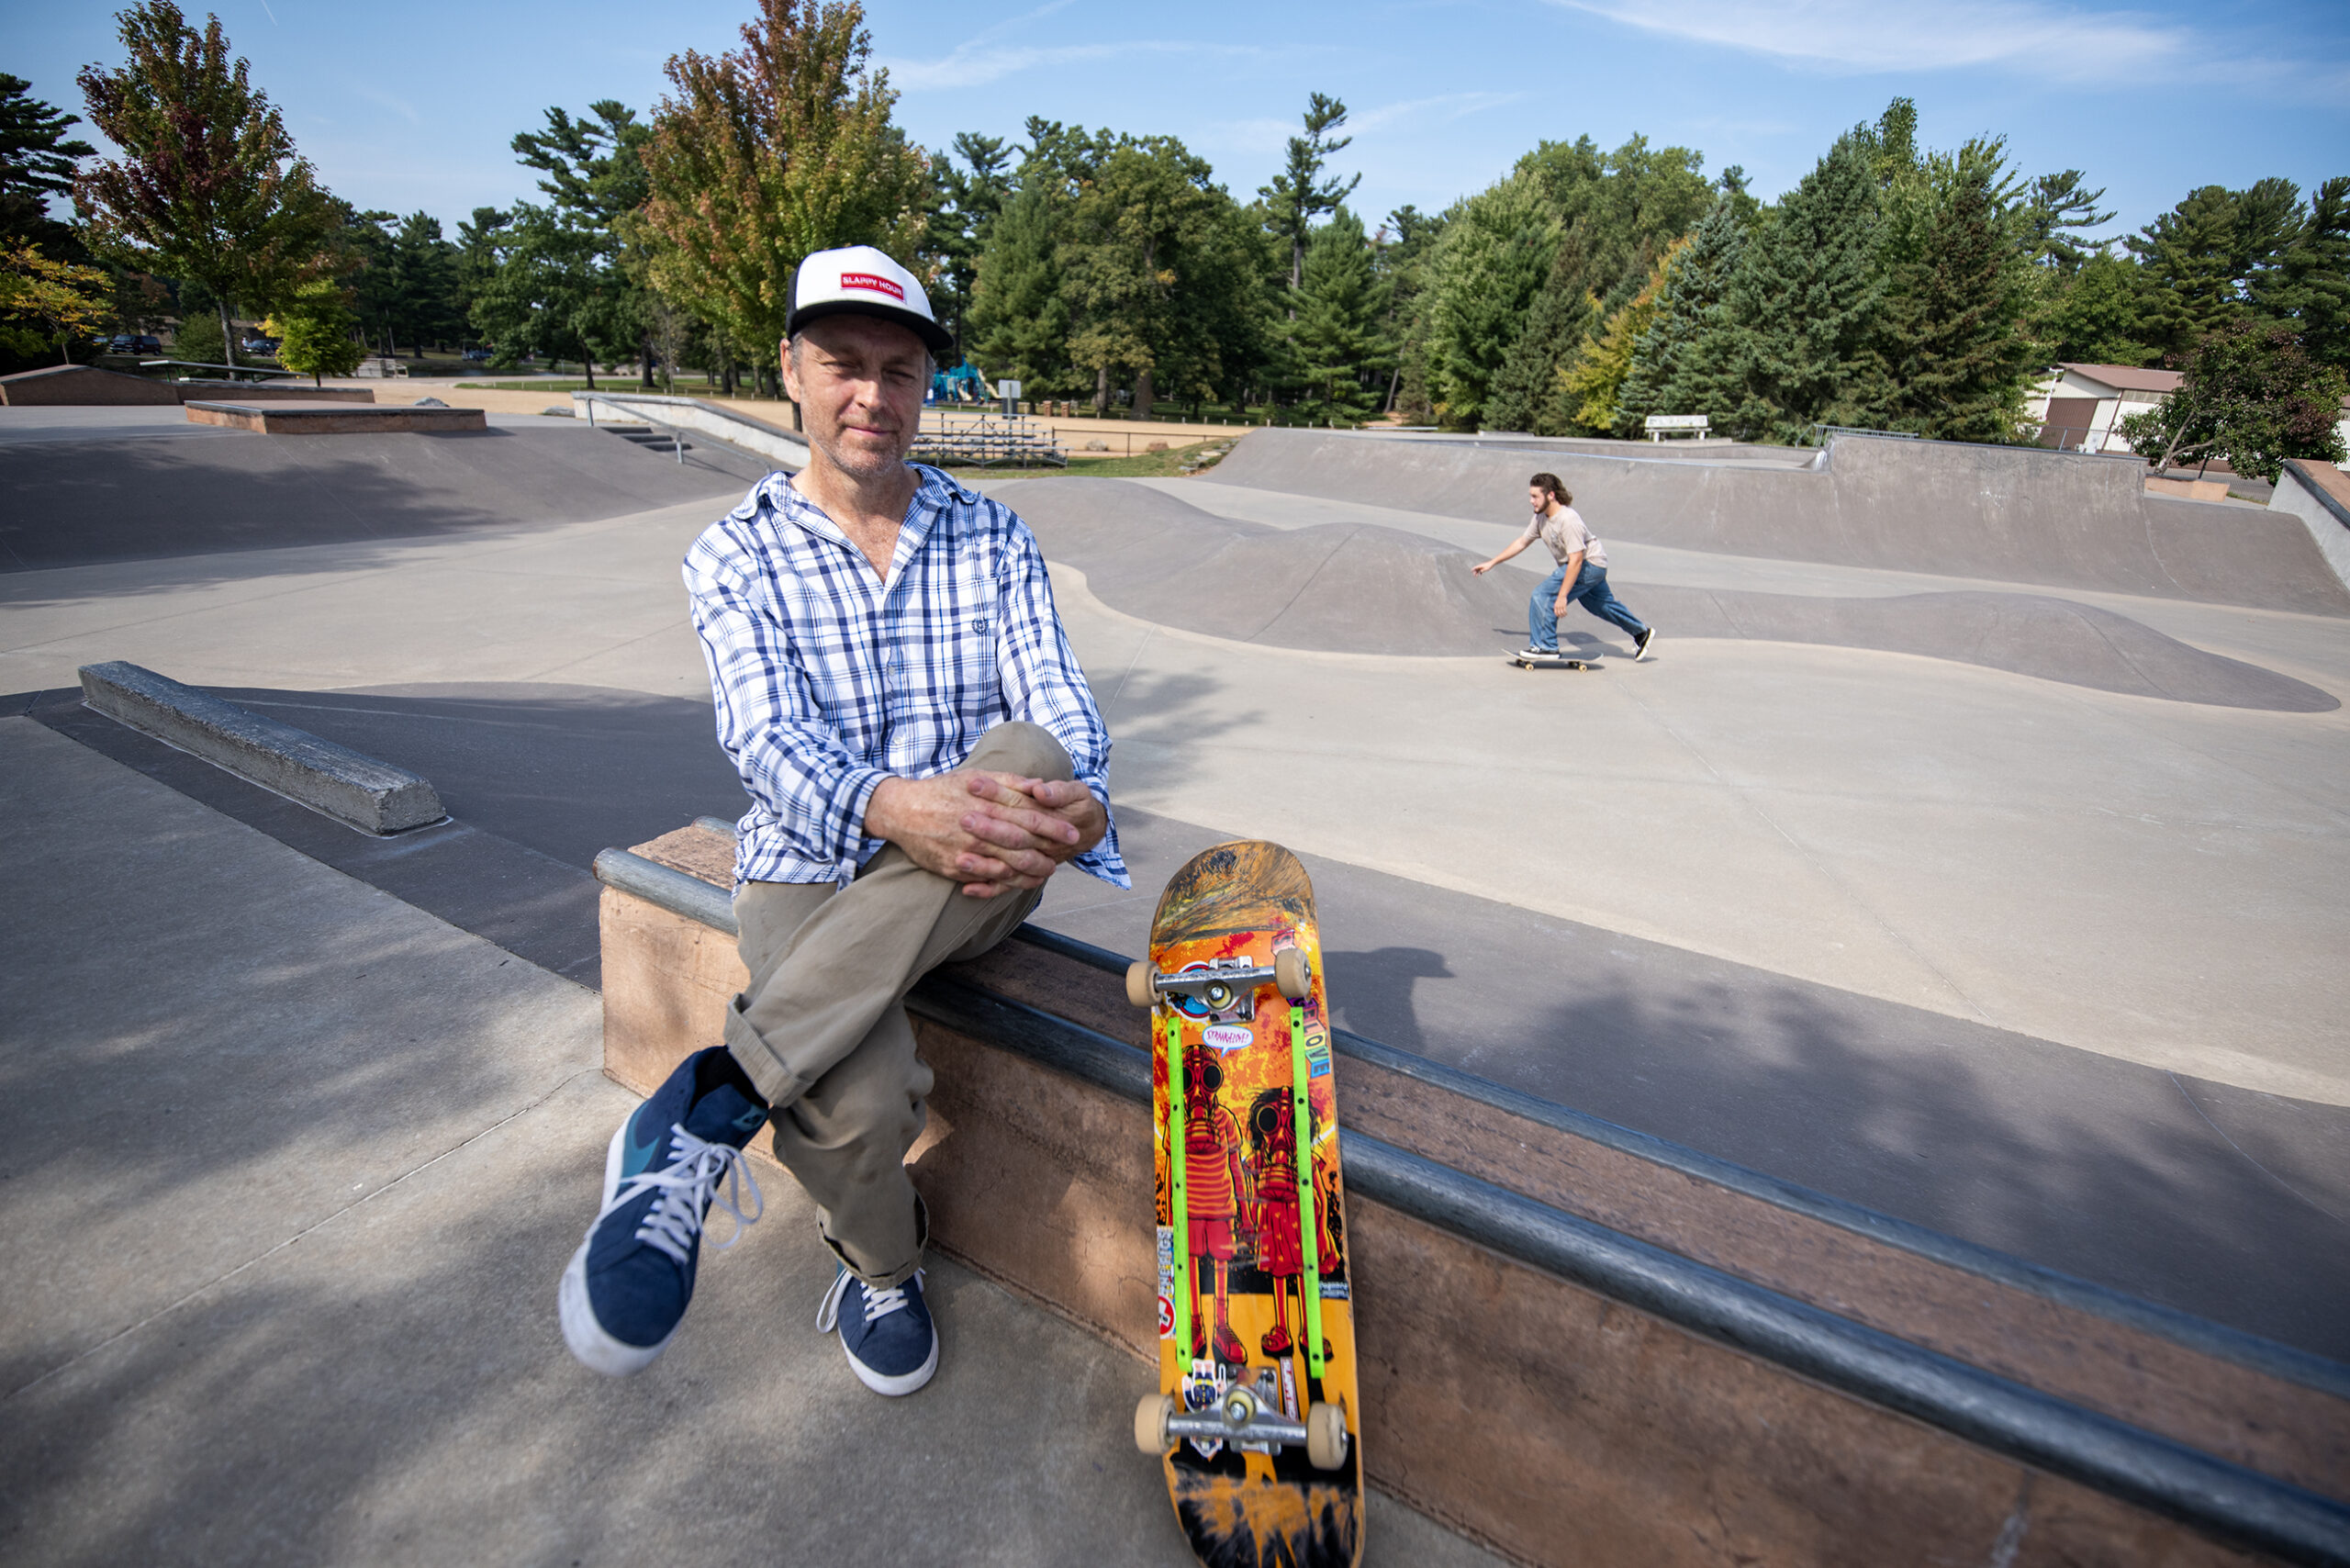 John sits on the side of a skate park next to his skateboard. A man skateboards behind him.